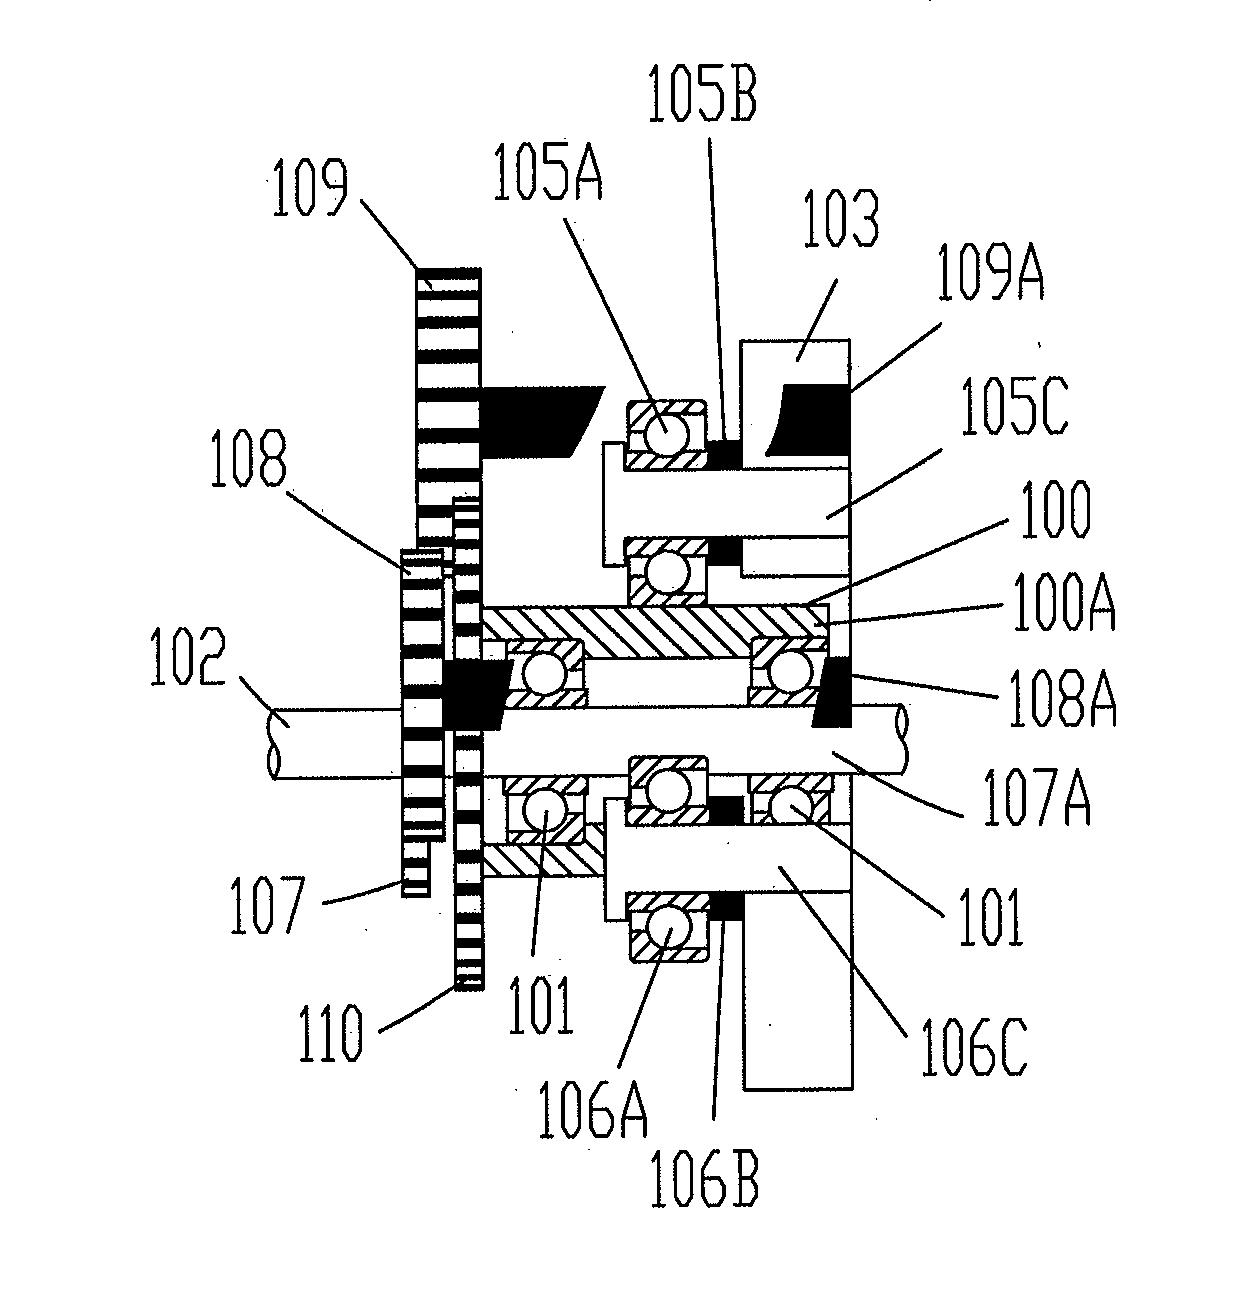 Mechanism for adjusting the rotation direction and speed of an inner ring and an outer ring of a rotary bearing